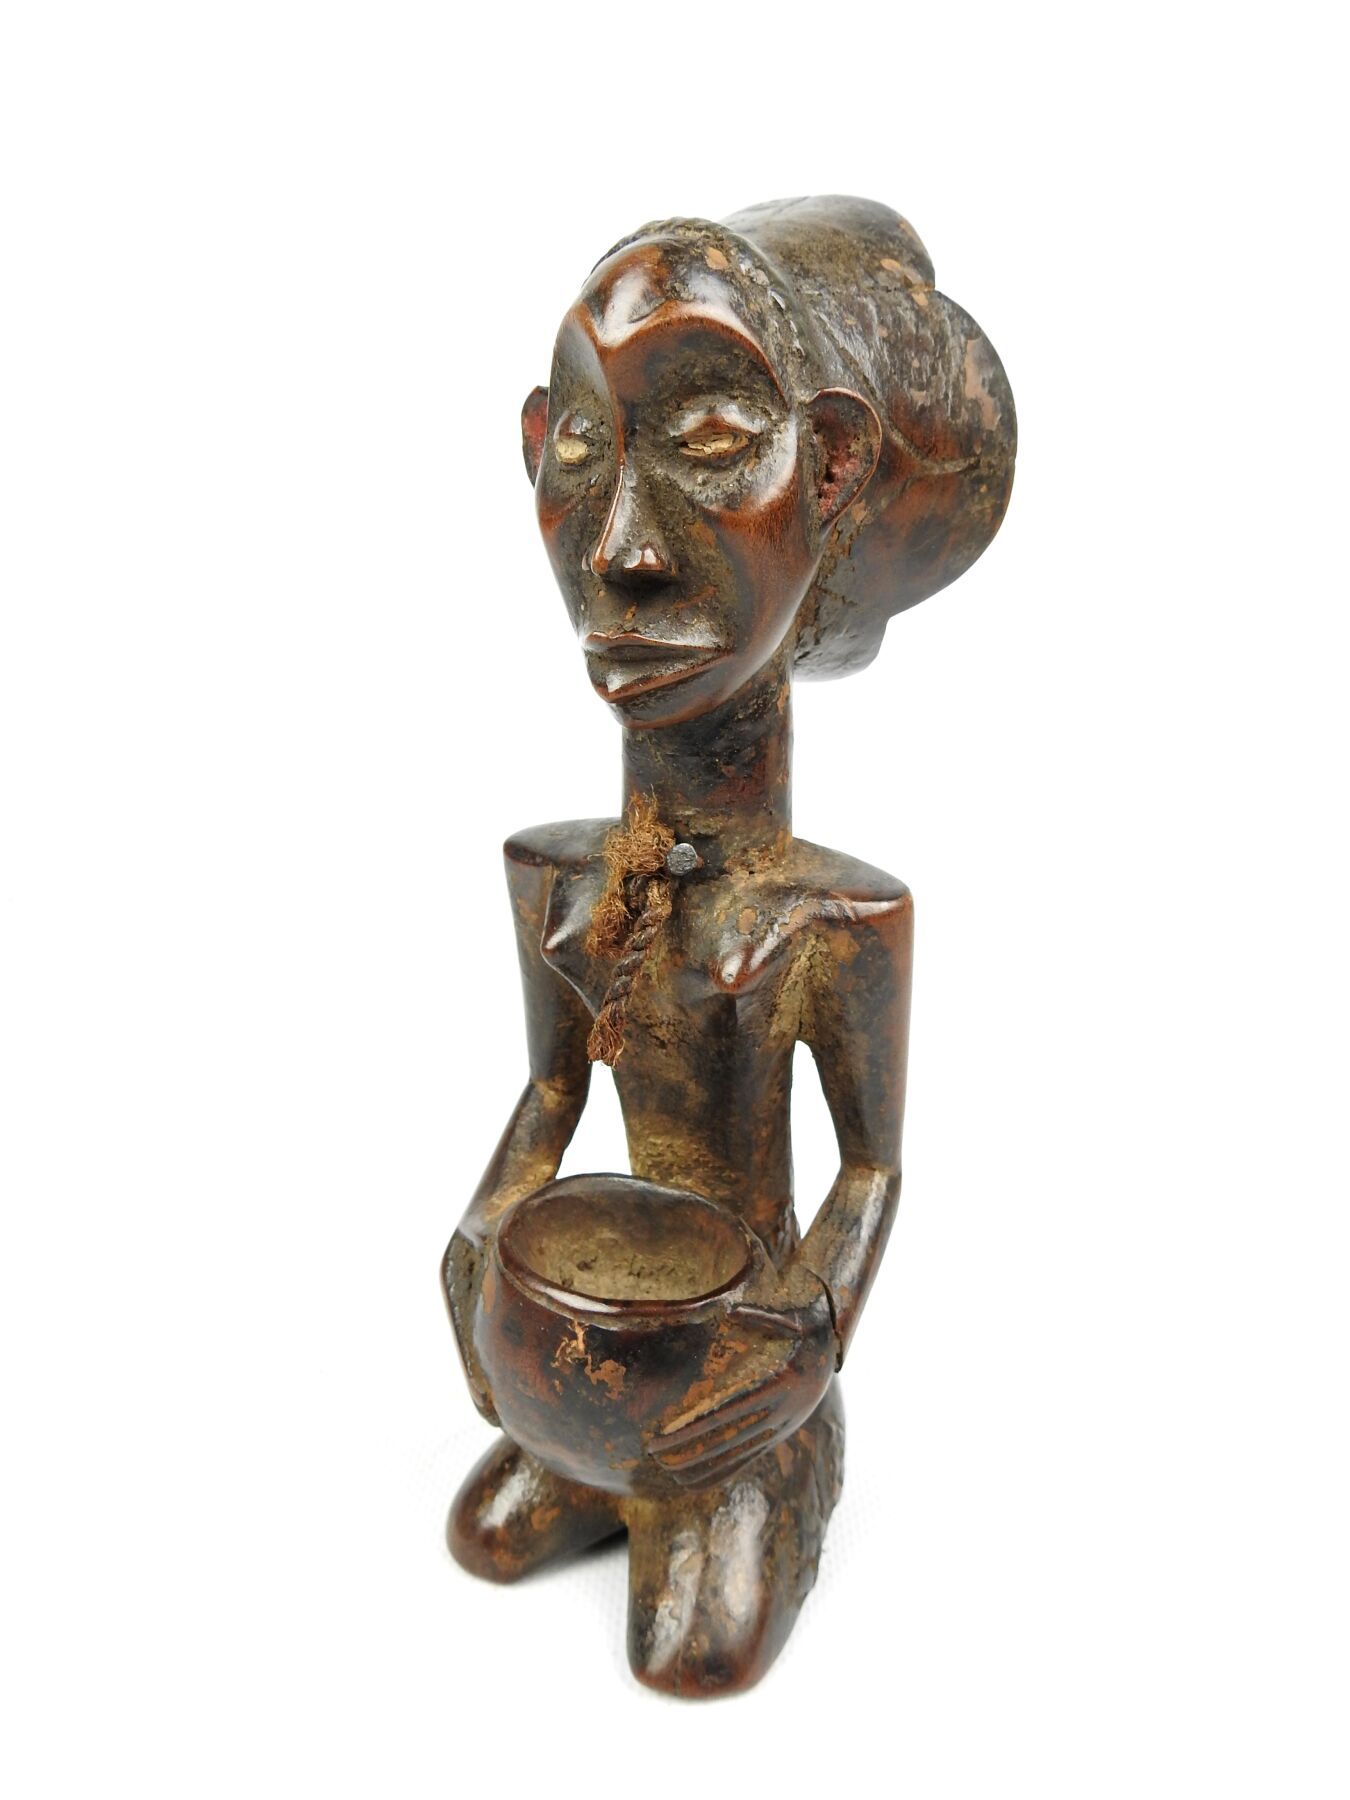 Null YOROUBA, Nigeria.
Carved and patinated hardwood.
Cup carrier representing a&hellip;